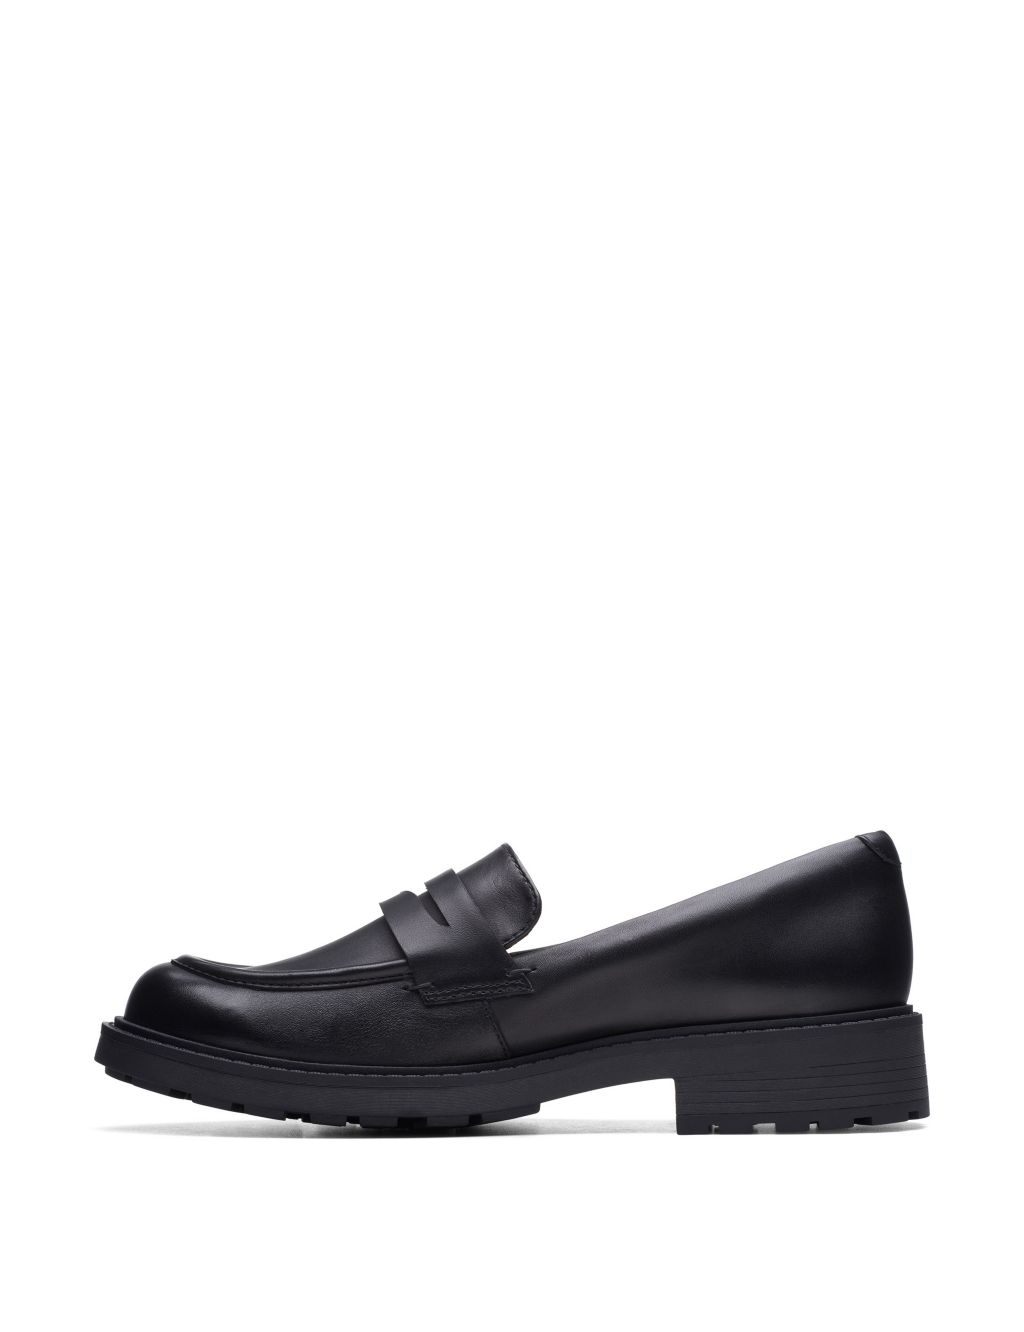 Leather Chunky Block Heel Loafers image 6